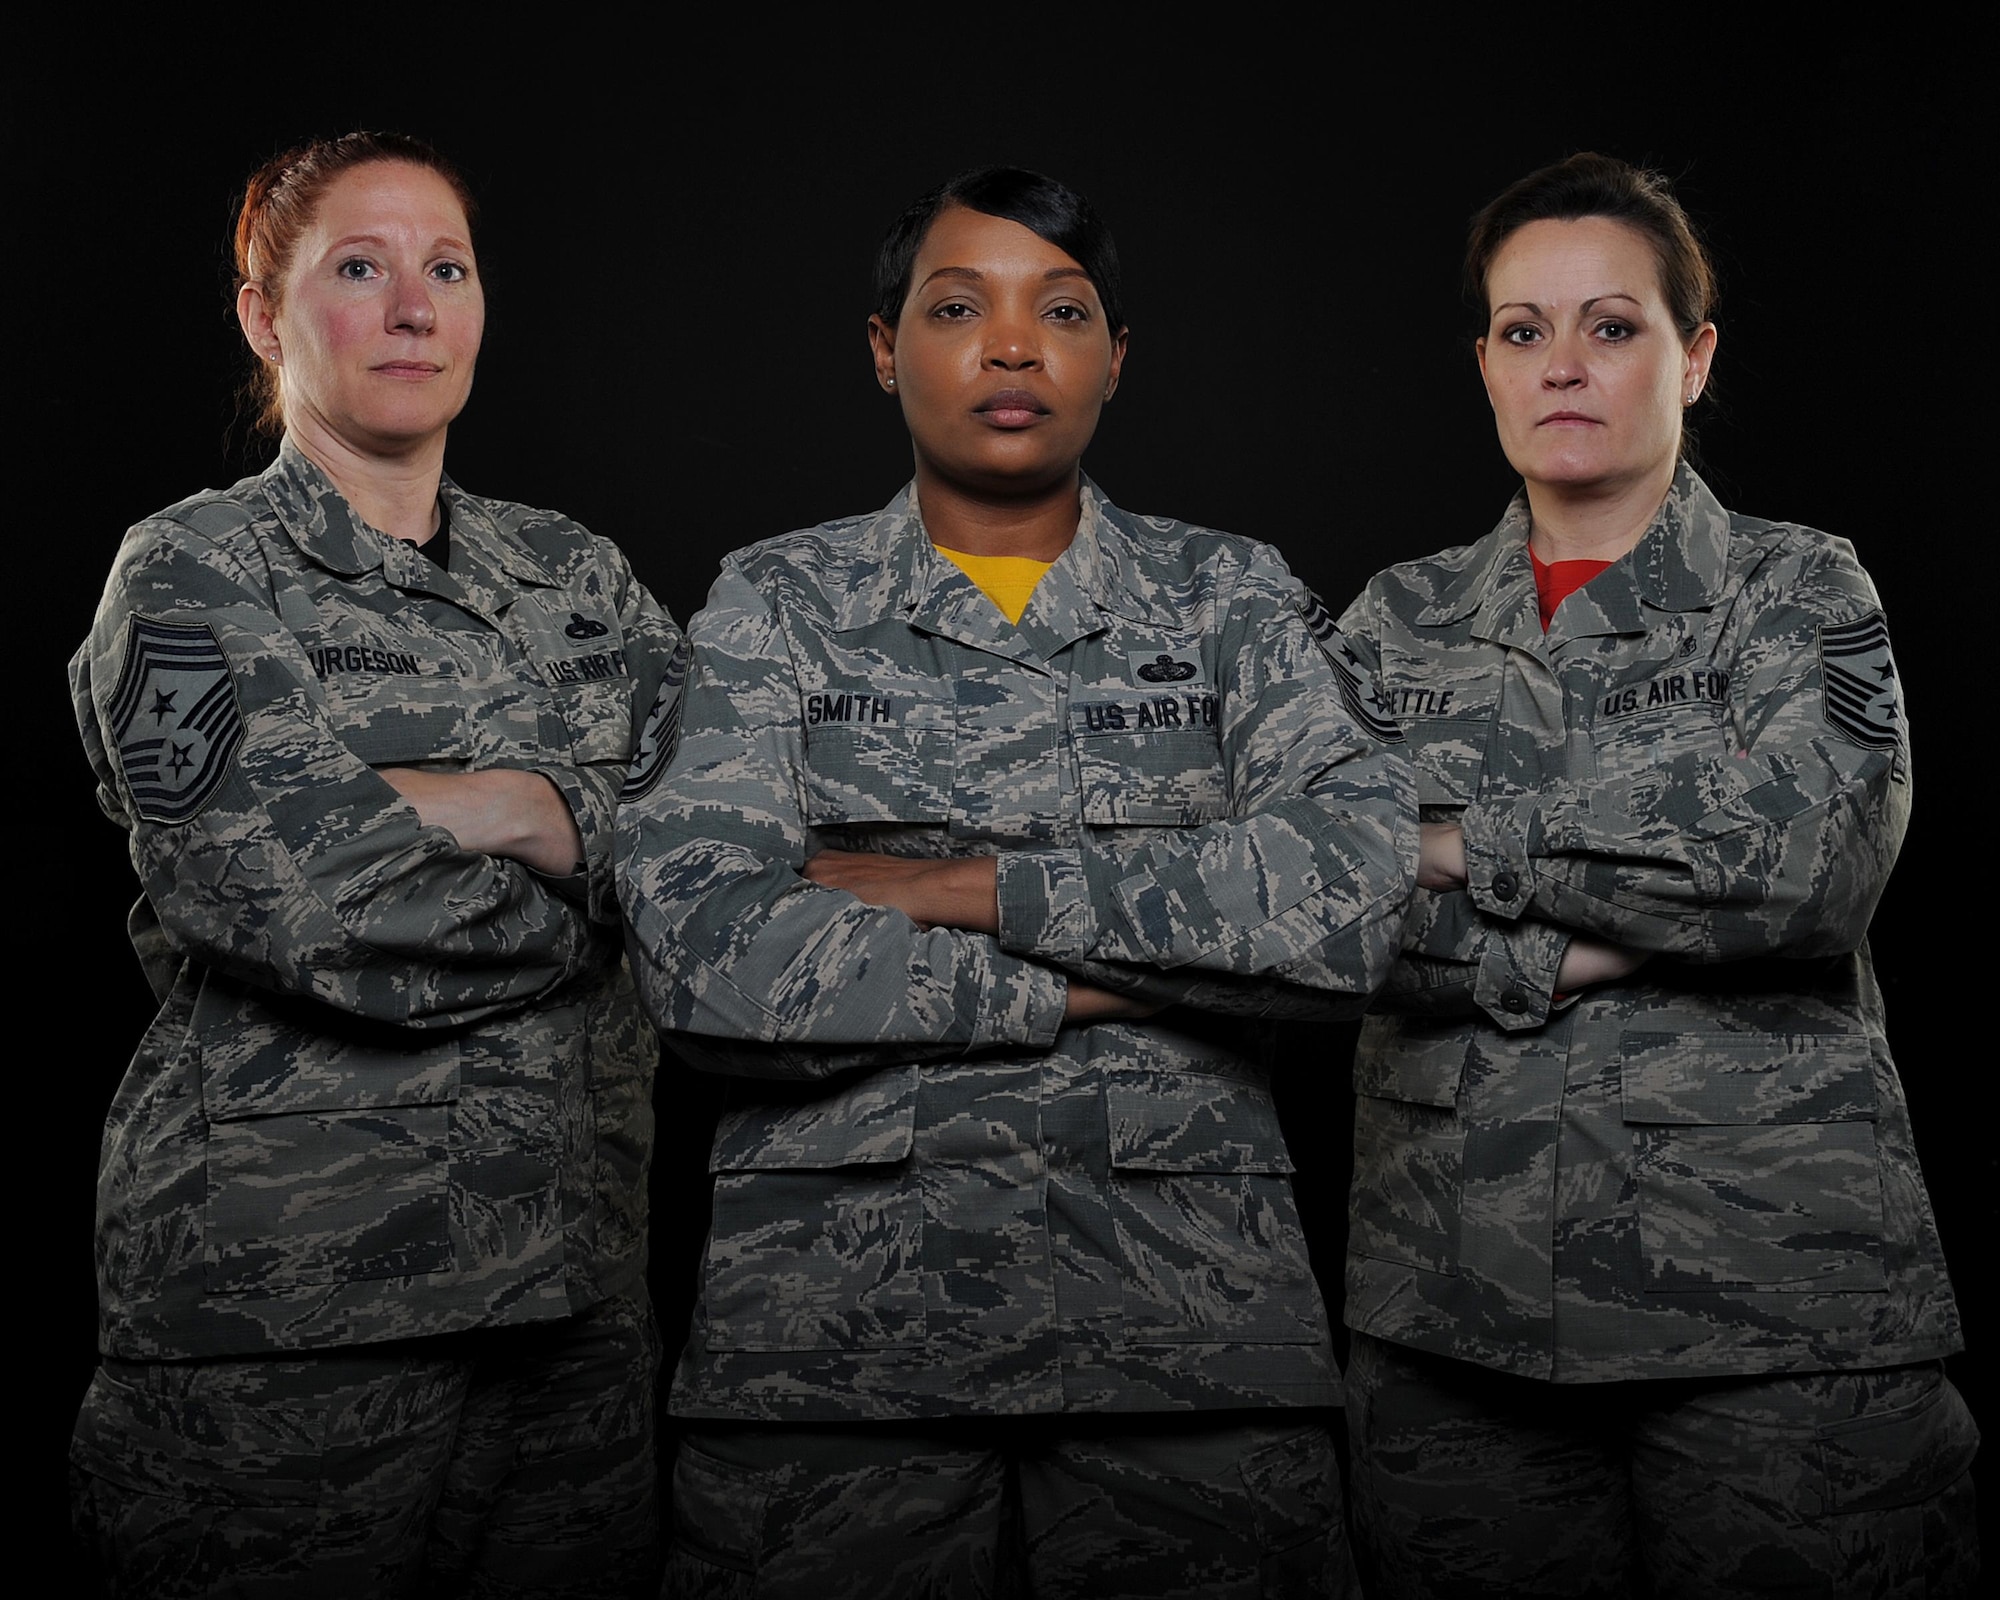 From left to right, U.S. Air Force Chief Master Sgt. Lisa Furgeson, the 442d Fighter Wing command chief, Chief Master Sgt. Melvina Smith, the 509th Bomb Wing command chief, and Chief Master Sgt. Jessica Settle, the 131st Bomb Wing command chief, are photographed for the Whiteman Warrior. This is the first time Team Whiteman has had female Airmen hold the position of command chief in all three wings at the same time.
(U.S. Air Force photo by Airman 1st Class Jazmin Smith)